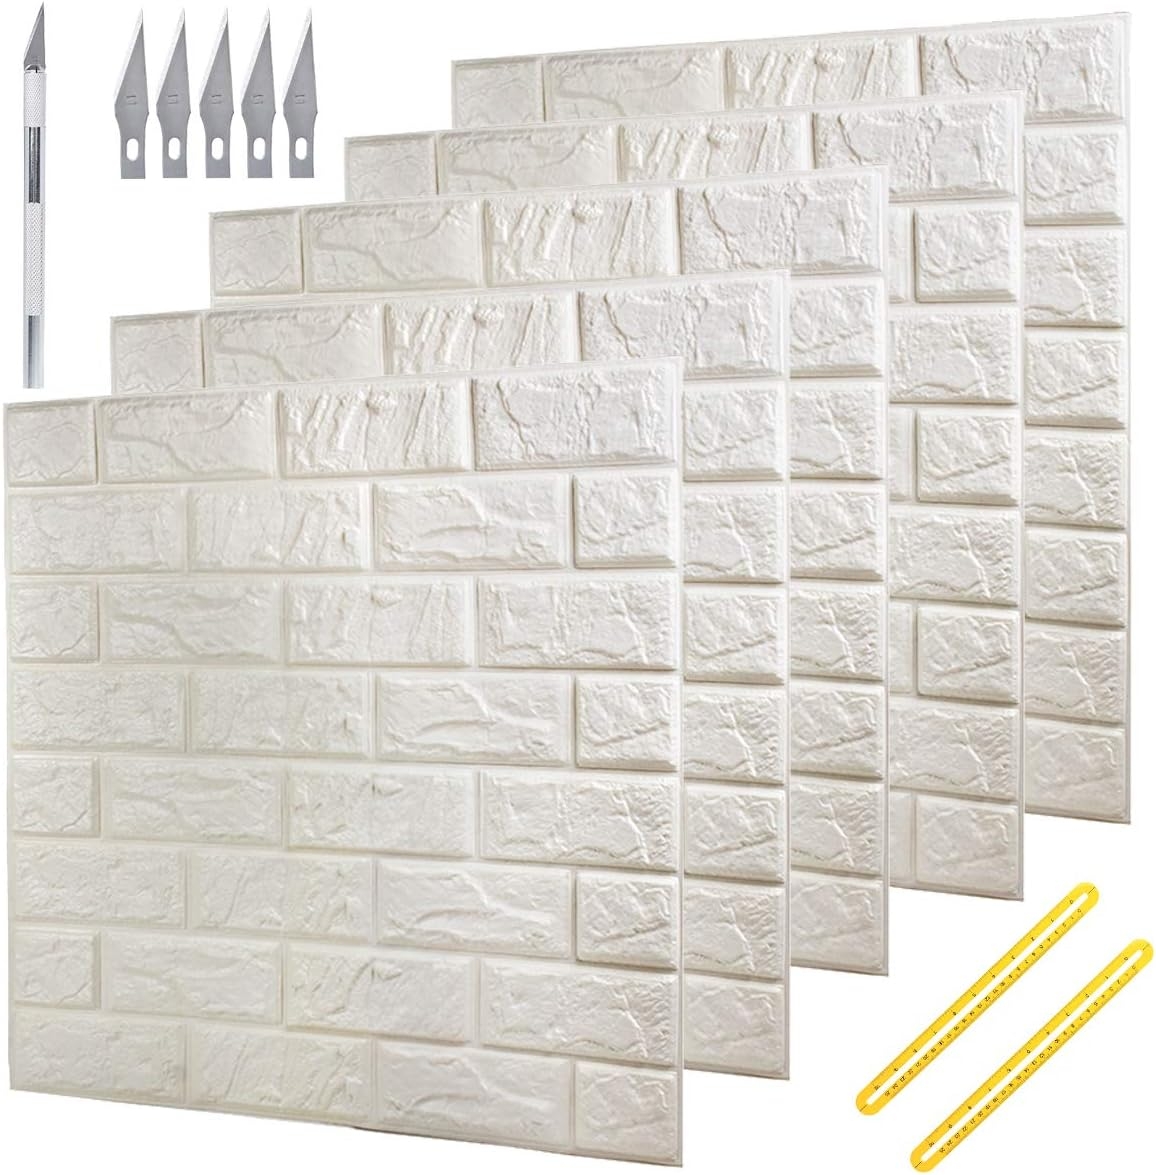 White 3D Brick Wallpaper 20 pcs Faux Brick Textured Effect Background Stickers for Wall Decoration Total 144 Square Feet Coverage